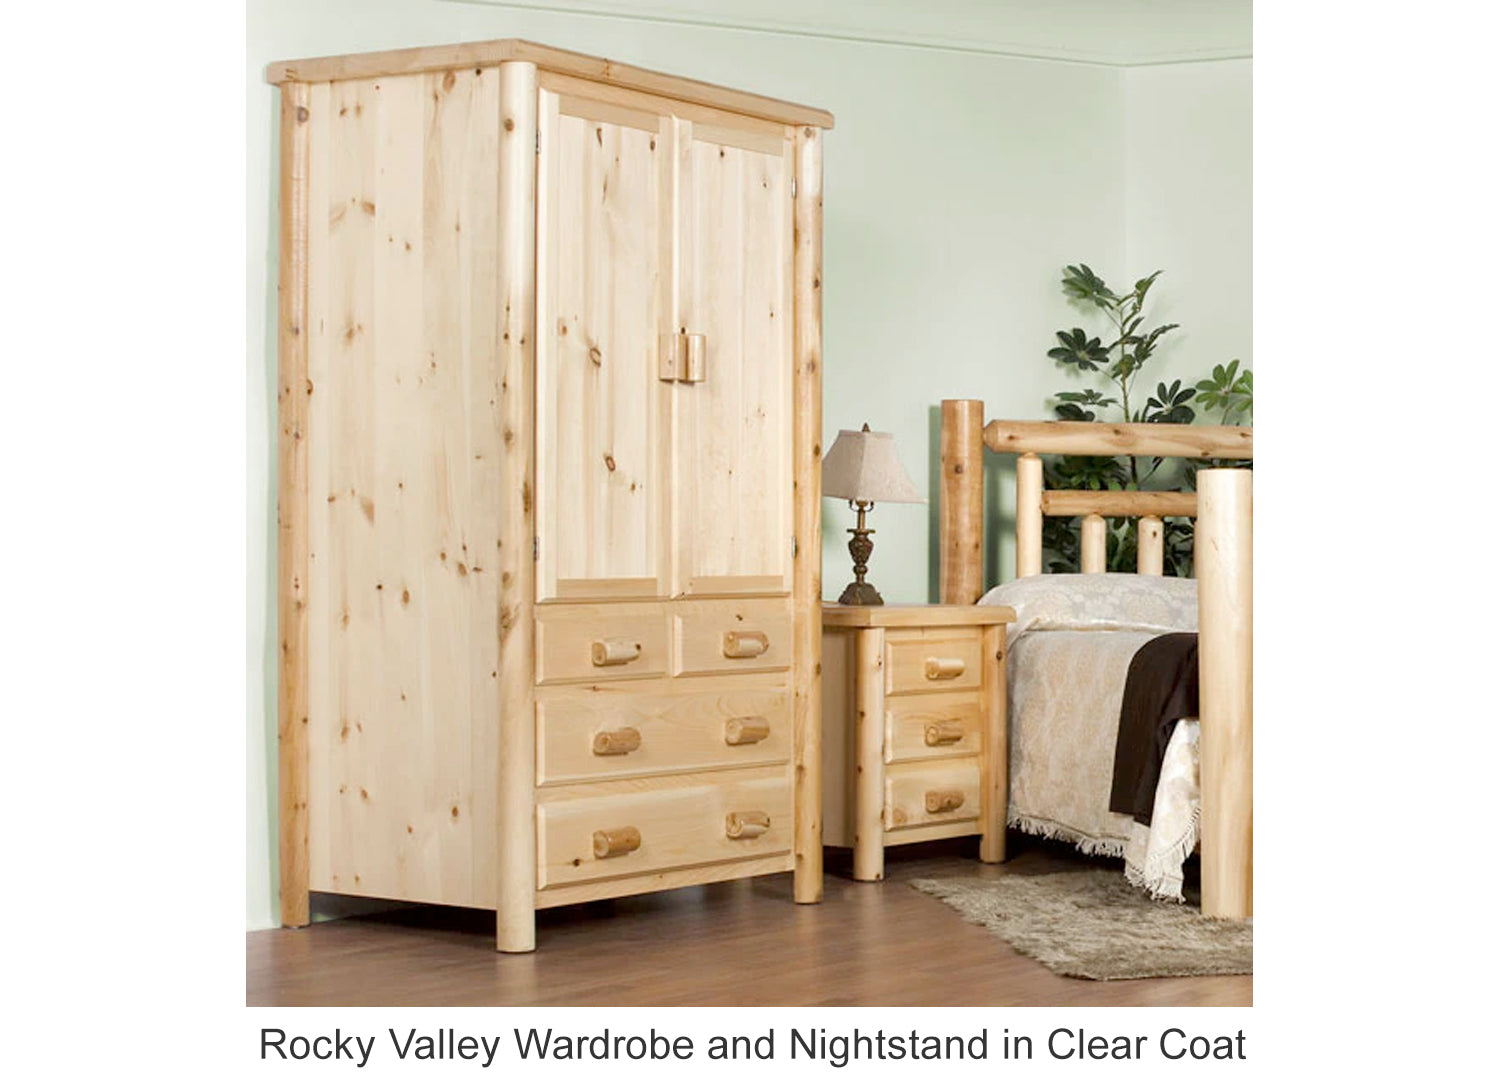 Rocky Valley Wardrobe and Nightstand in Clear Coat